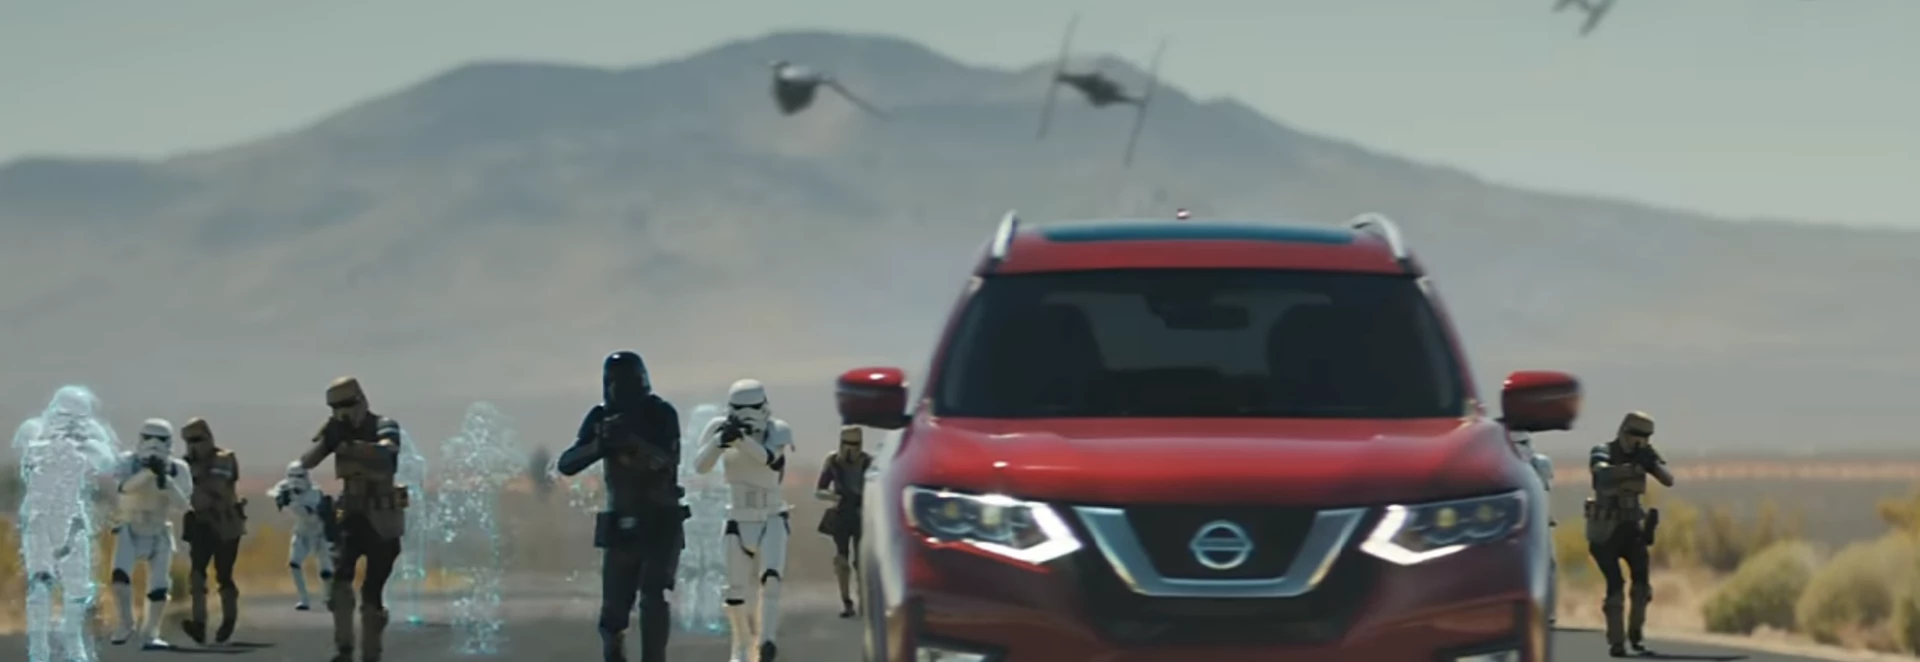 See the Nissan X-Trail battle Rebel scum in new Star Wars: Rogue One tie-in 